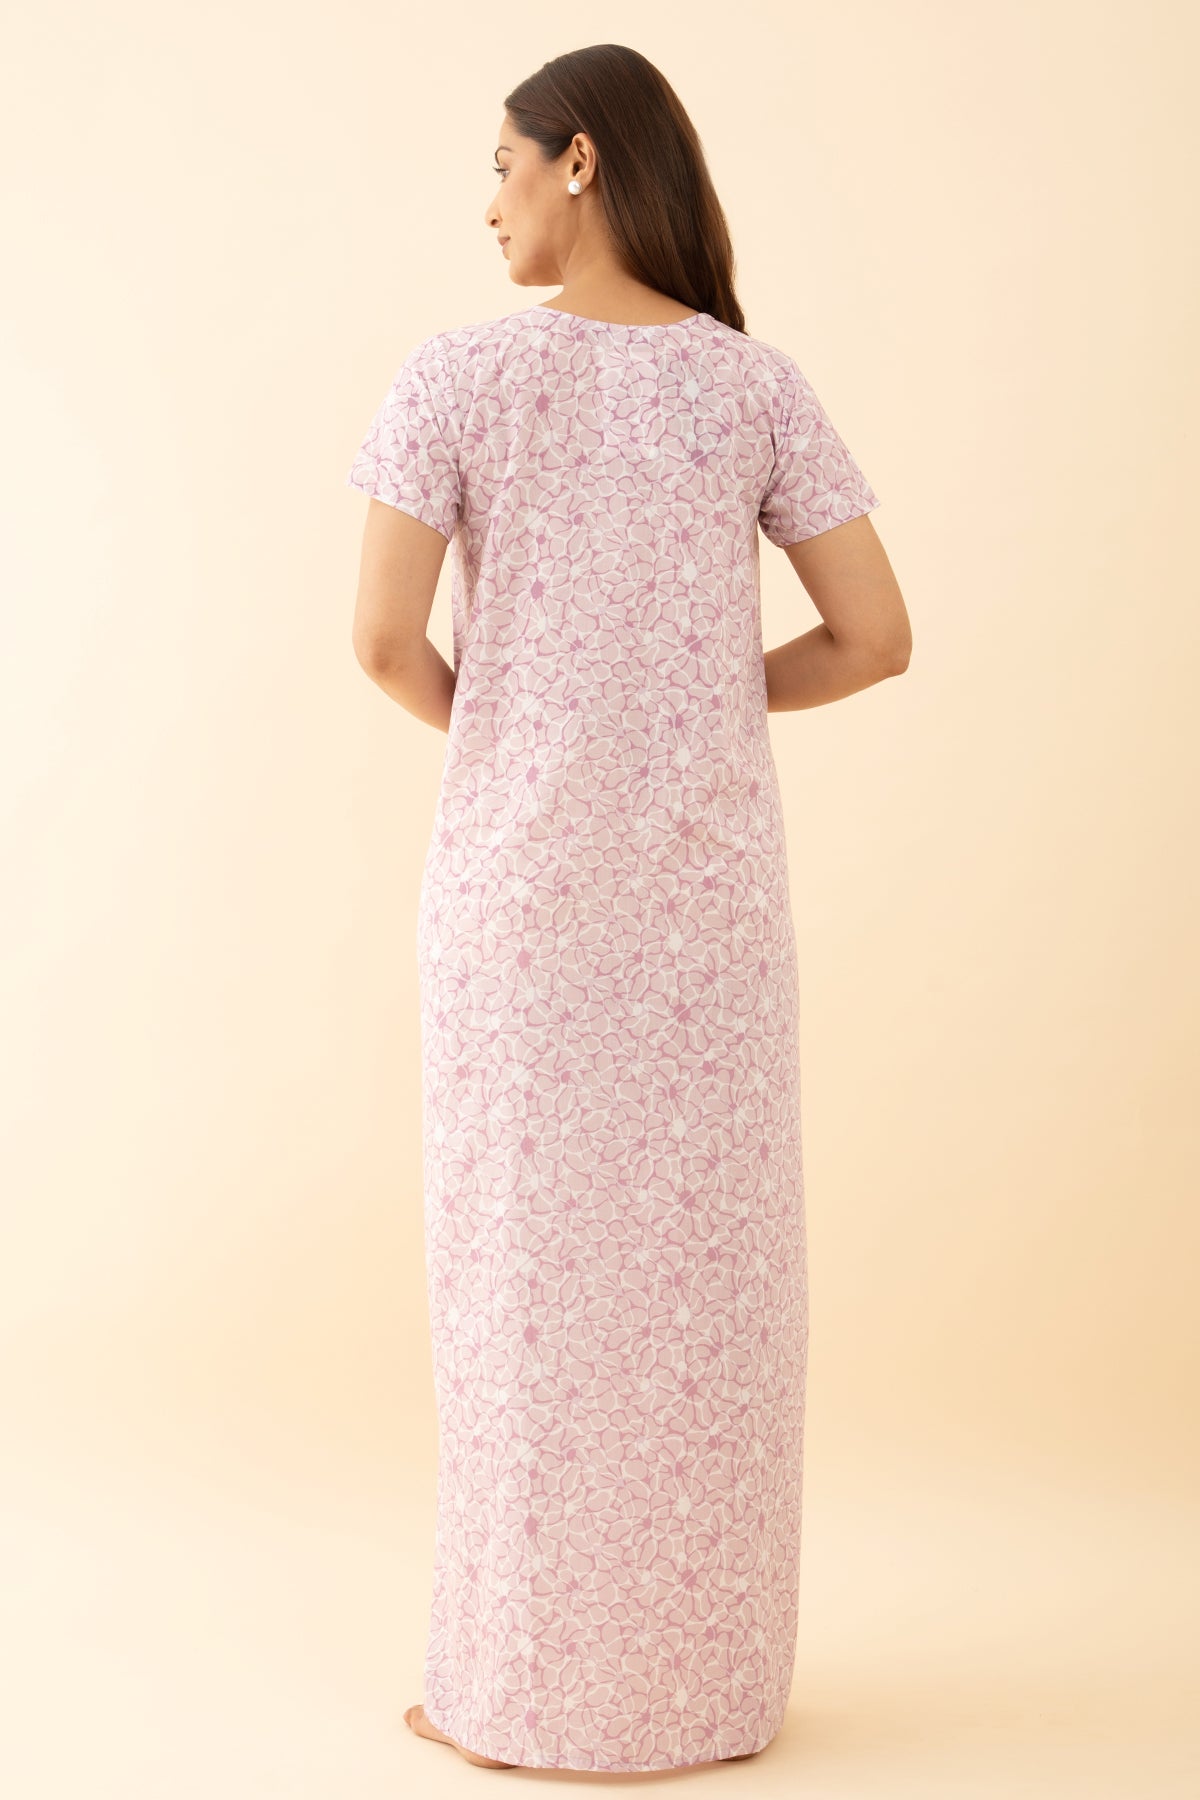 Floral Printed Pink Nighty: Square Neck Embroidery